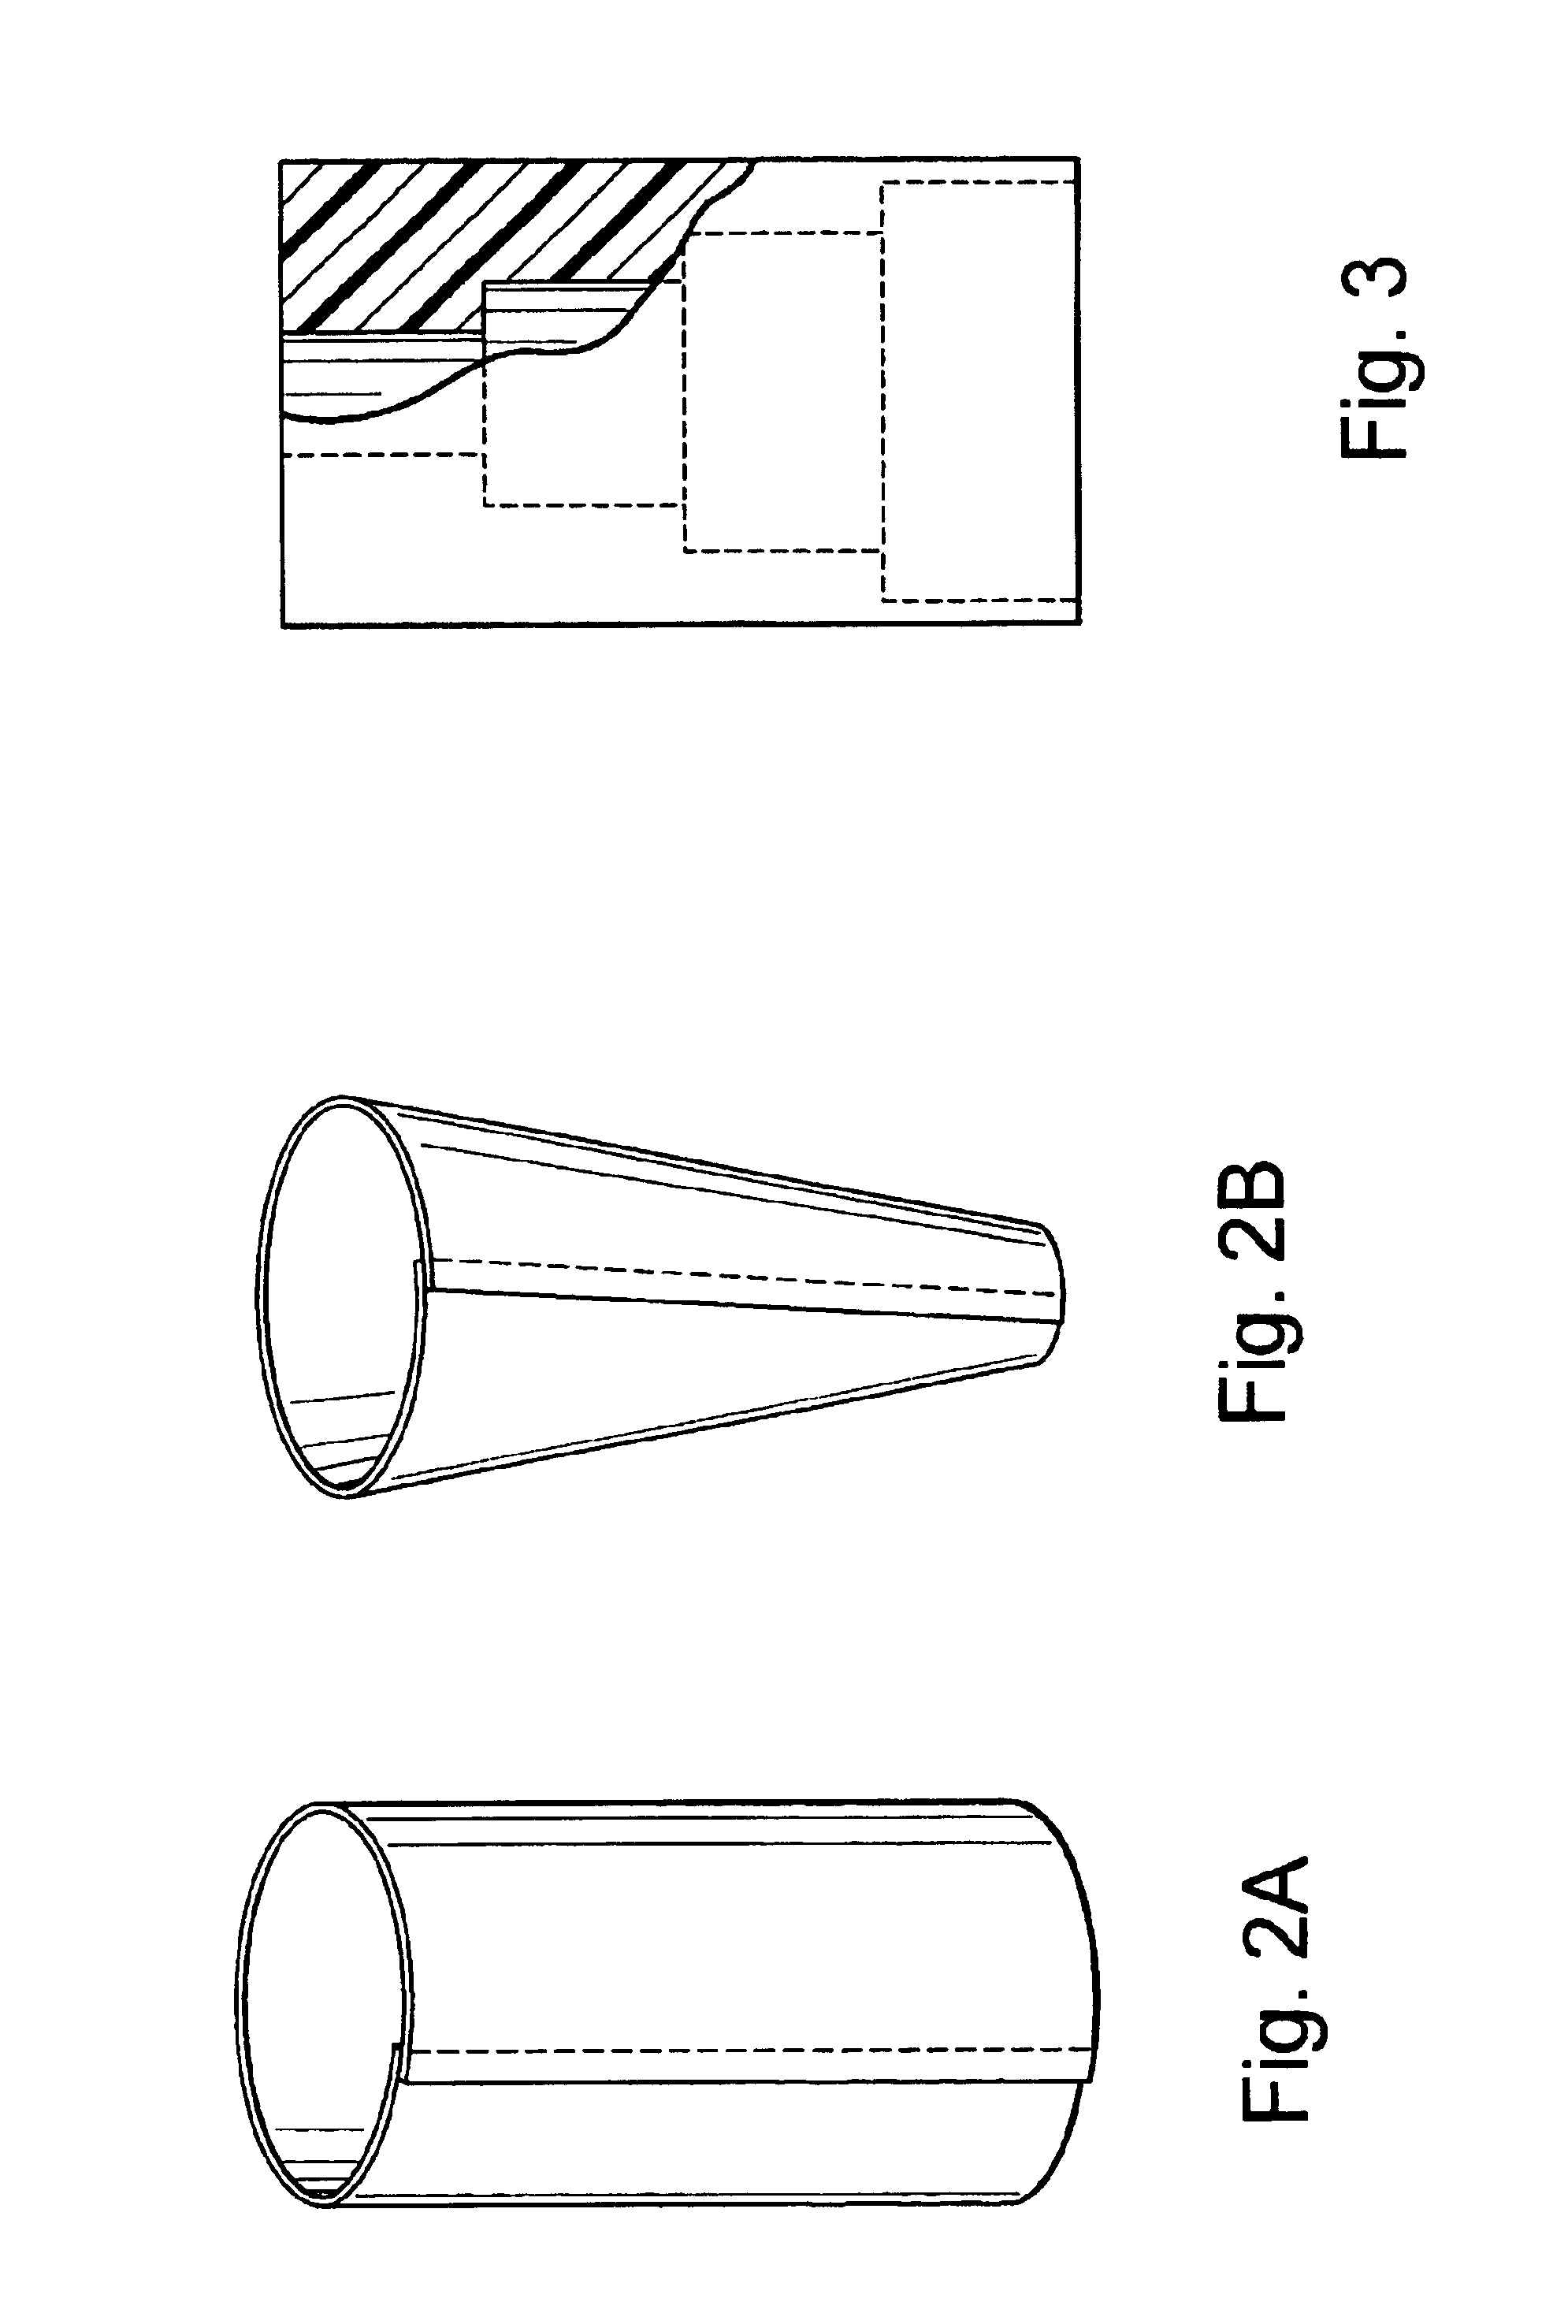 Self-supporting, shaped, three-dimensional biopolymeric materials and methods